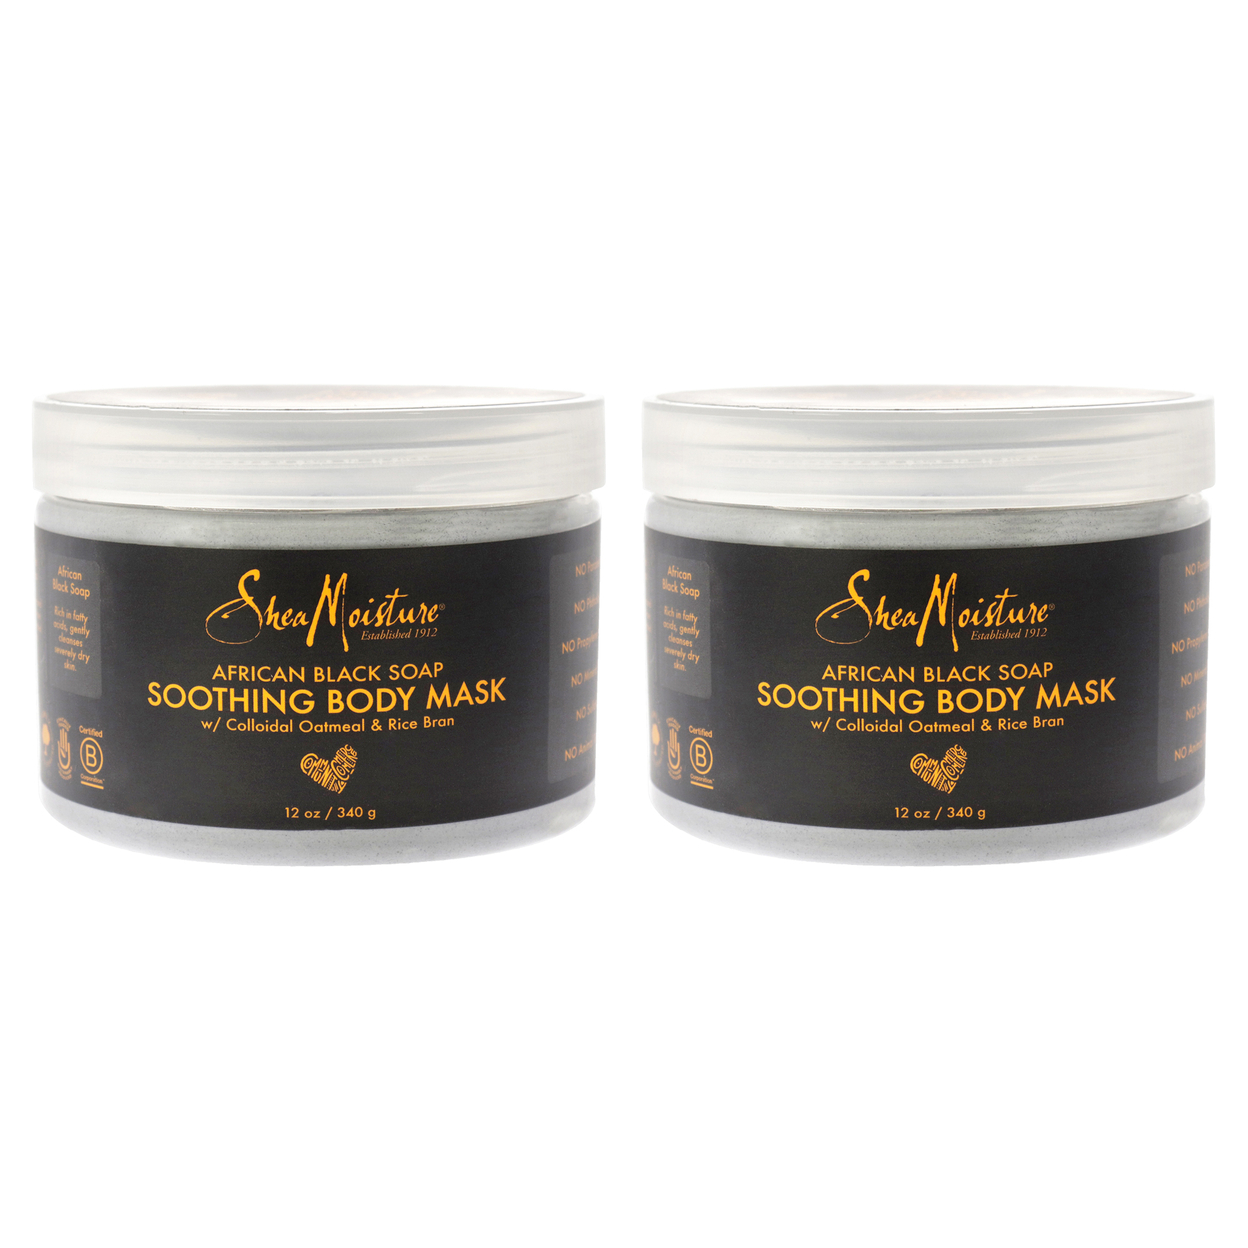 Shea Moisture African Black Soap Soothing Body Mask - Pack Of 2 12 Oz